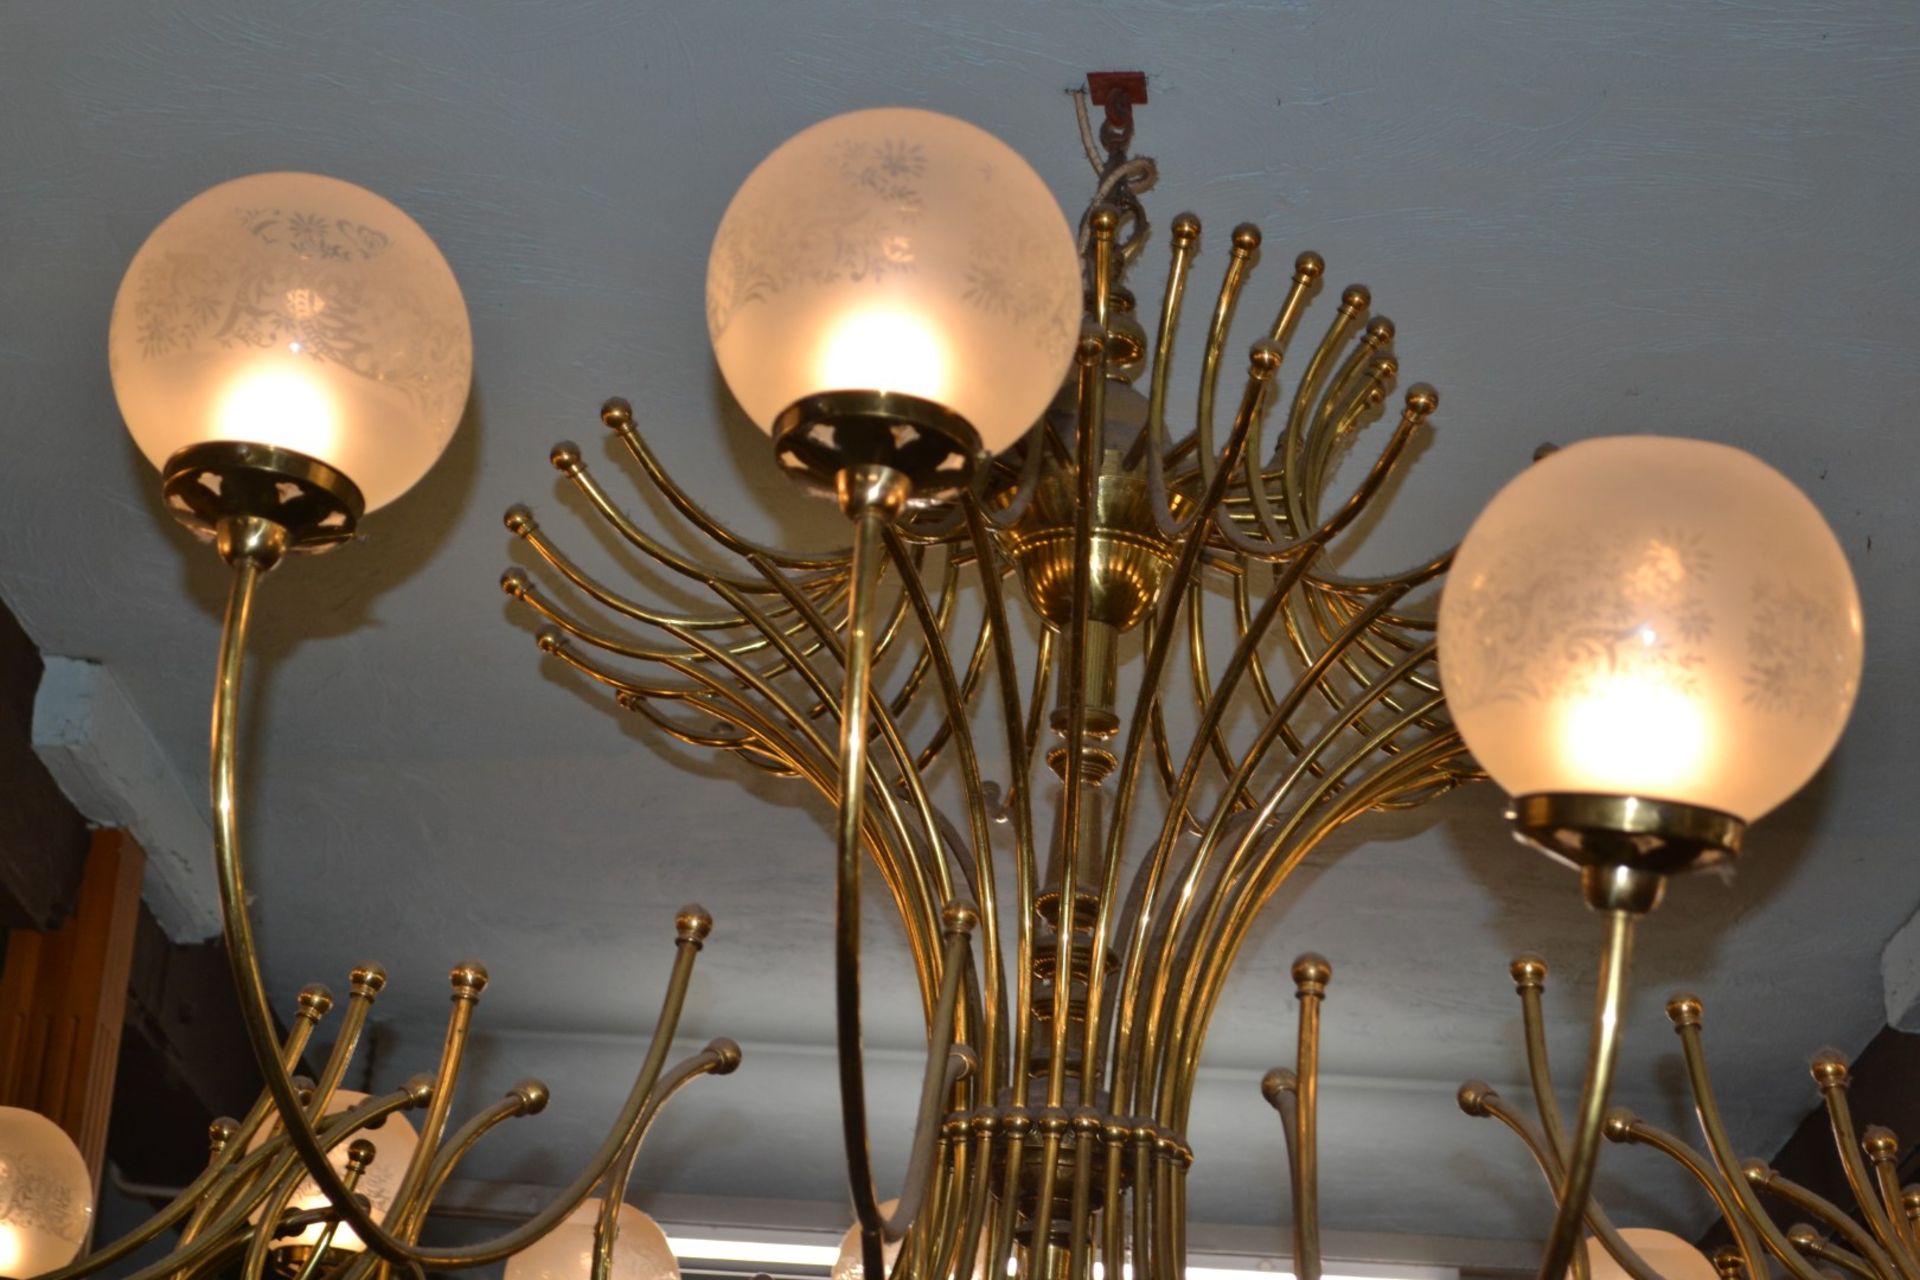 1 x Vintage 24 Light Brass Chandelier With Opaque Globe Shades - 261 cms Width - Ref BB000 - CL351 - - Image 4 of 7